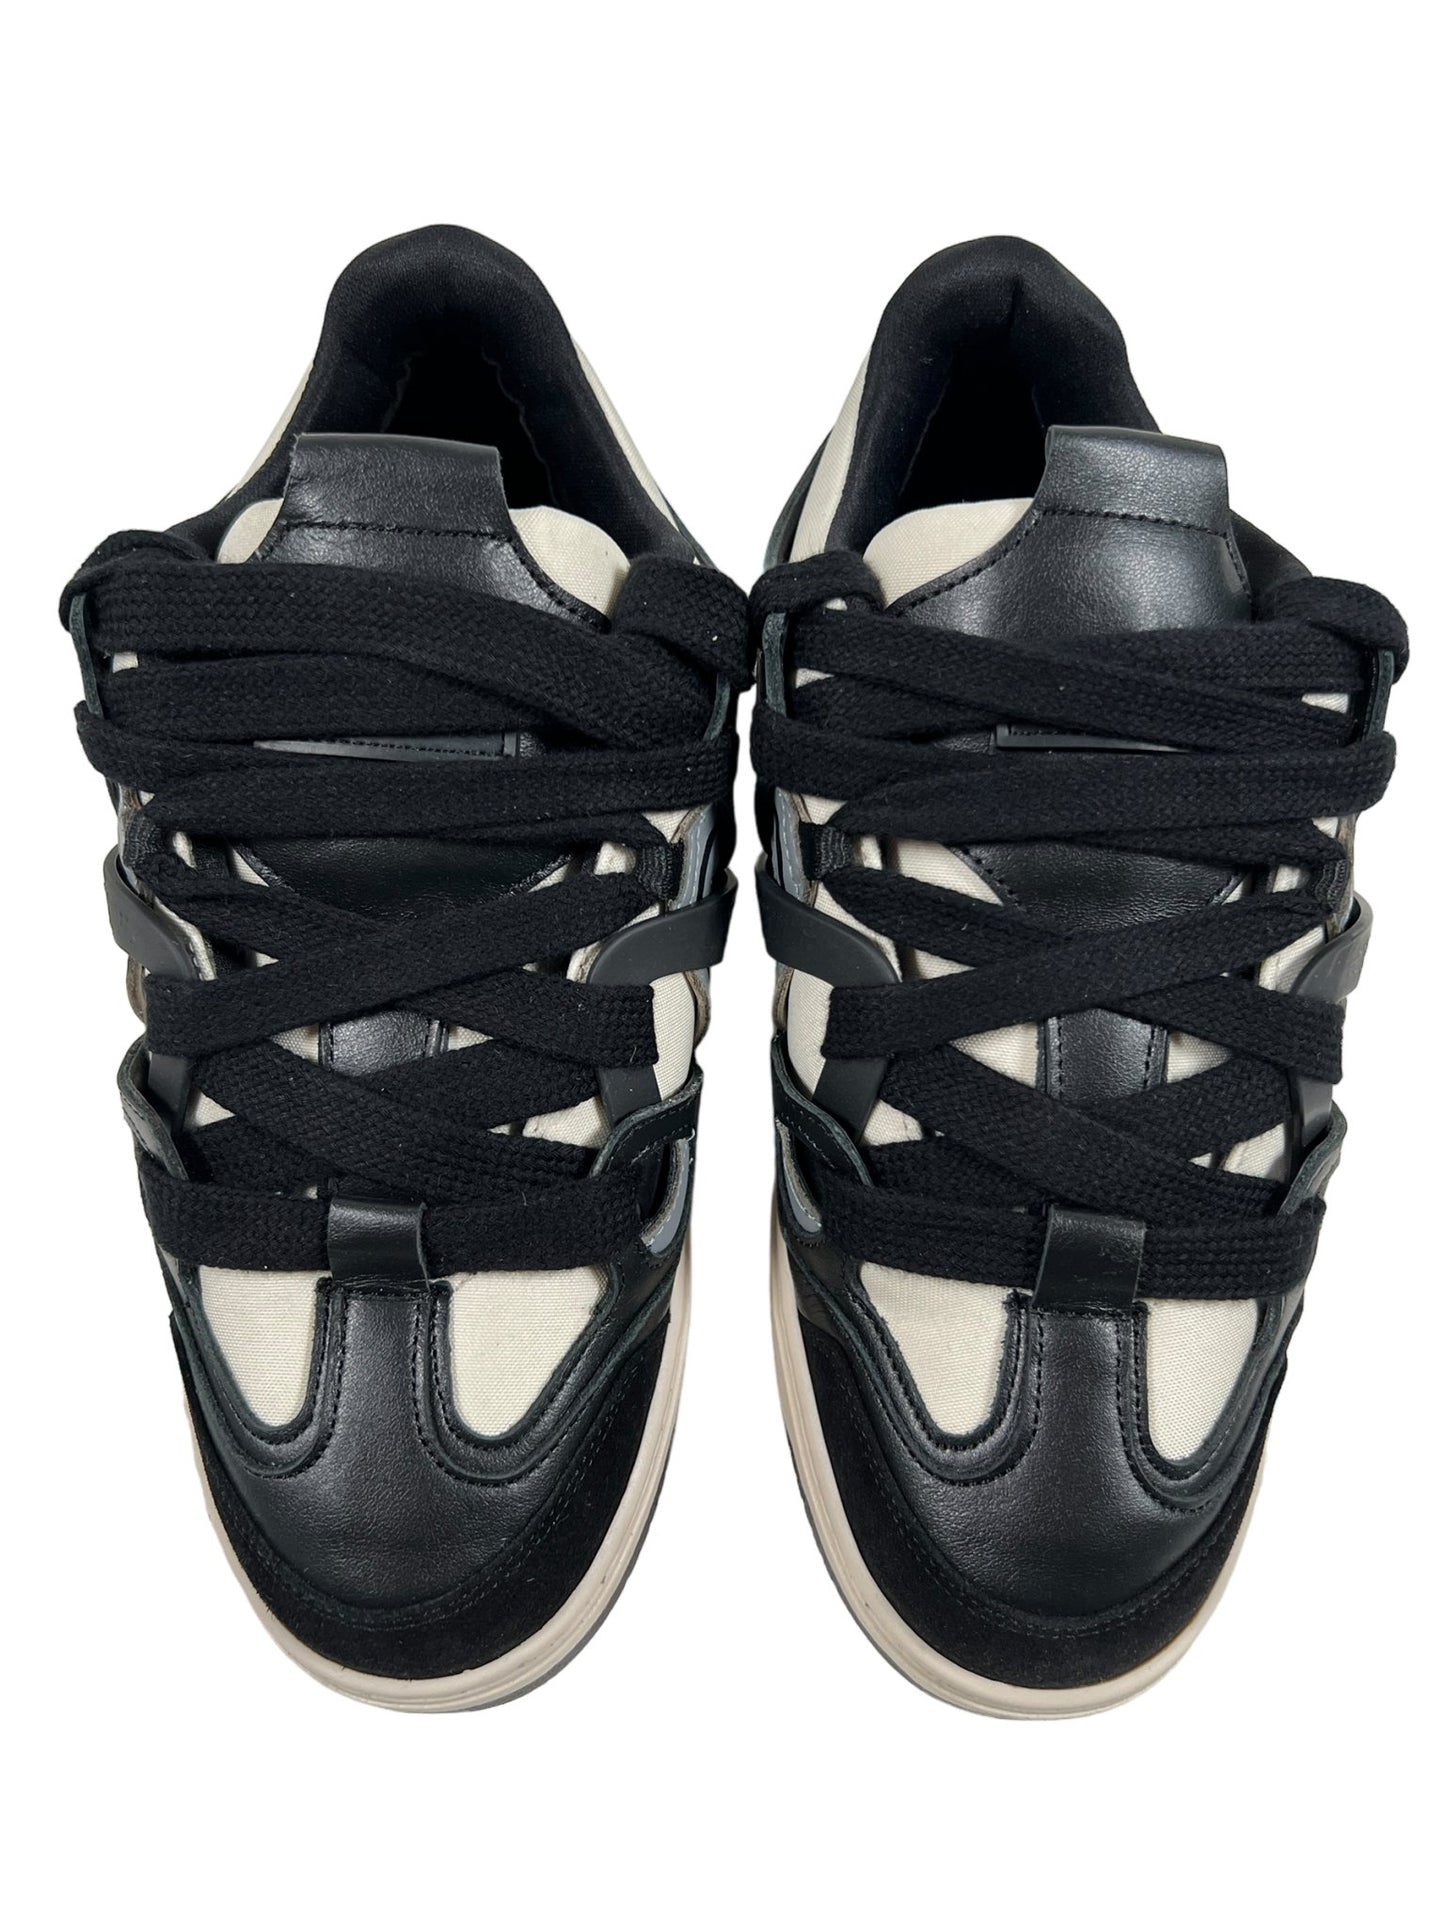 A pair of REPRESENT M12068-37 BULLY LEATHER BLACK sneakers with crisscrossing laces, viewed from above on a white background.